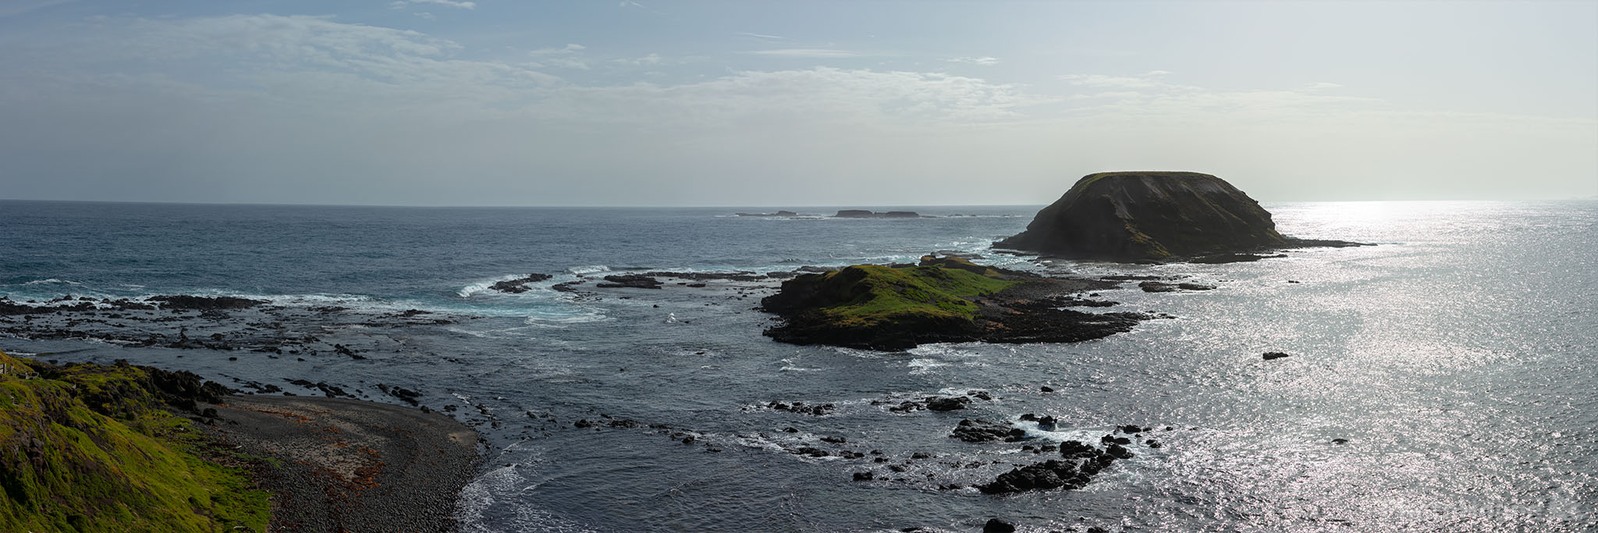 Image of Round Island from The Nobbies Viewpoint by John Freeman